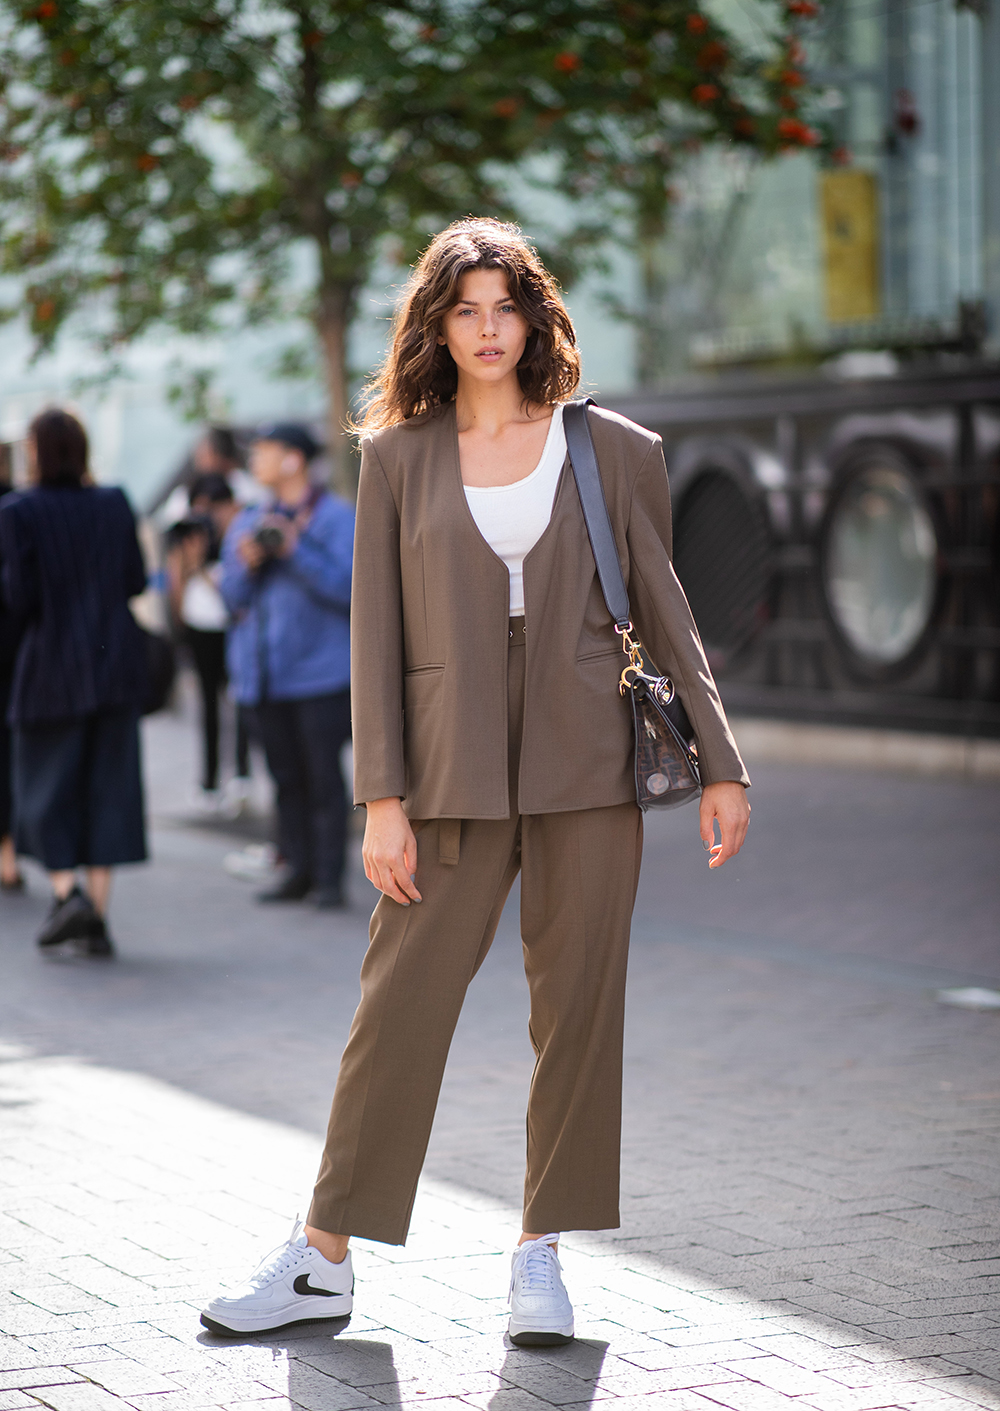 LONDON, ENGLAND - SEPTEMBER 16: Model Georgia Fowler wearing brown suit, cropped top is seen outside Roland Mouret during London Fashion Week September 2018 on September 16, 2018 in London, England. (Photo by Christian Vierig/Getty Images)